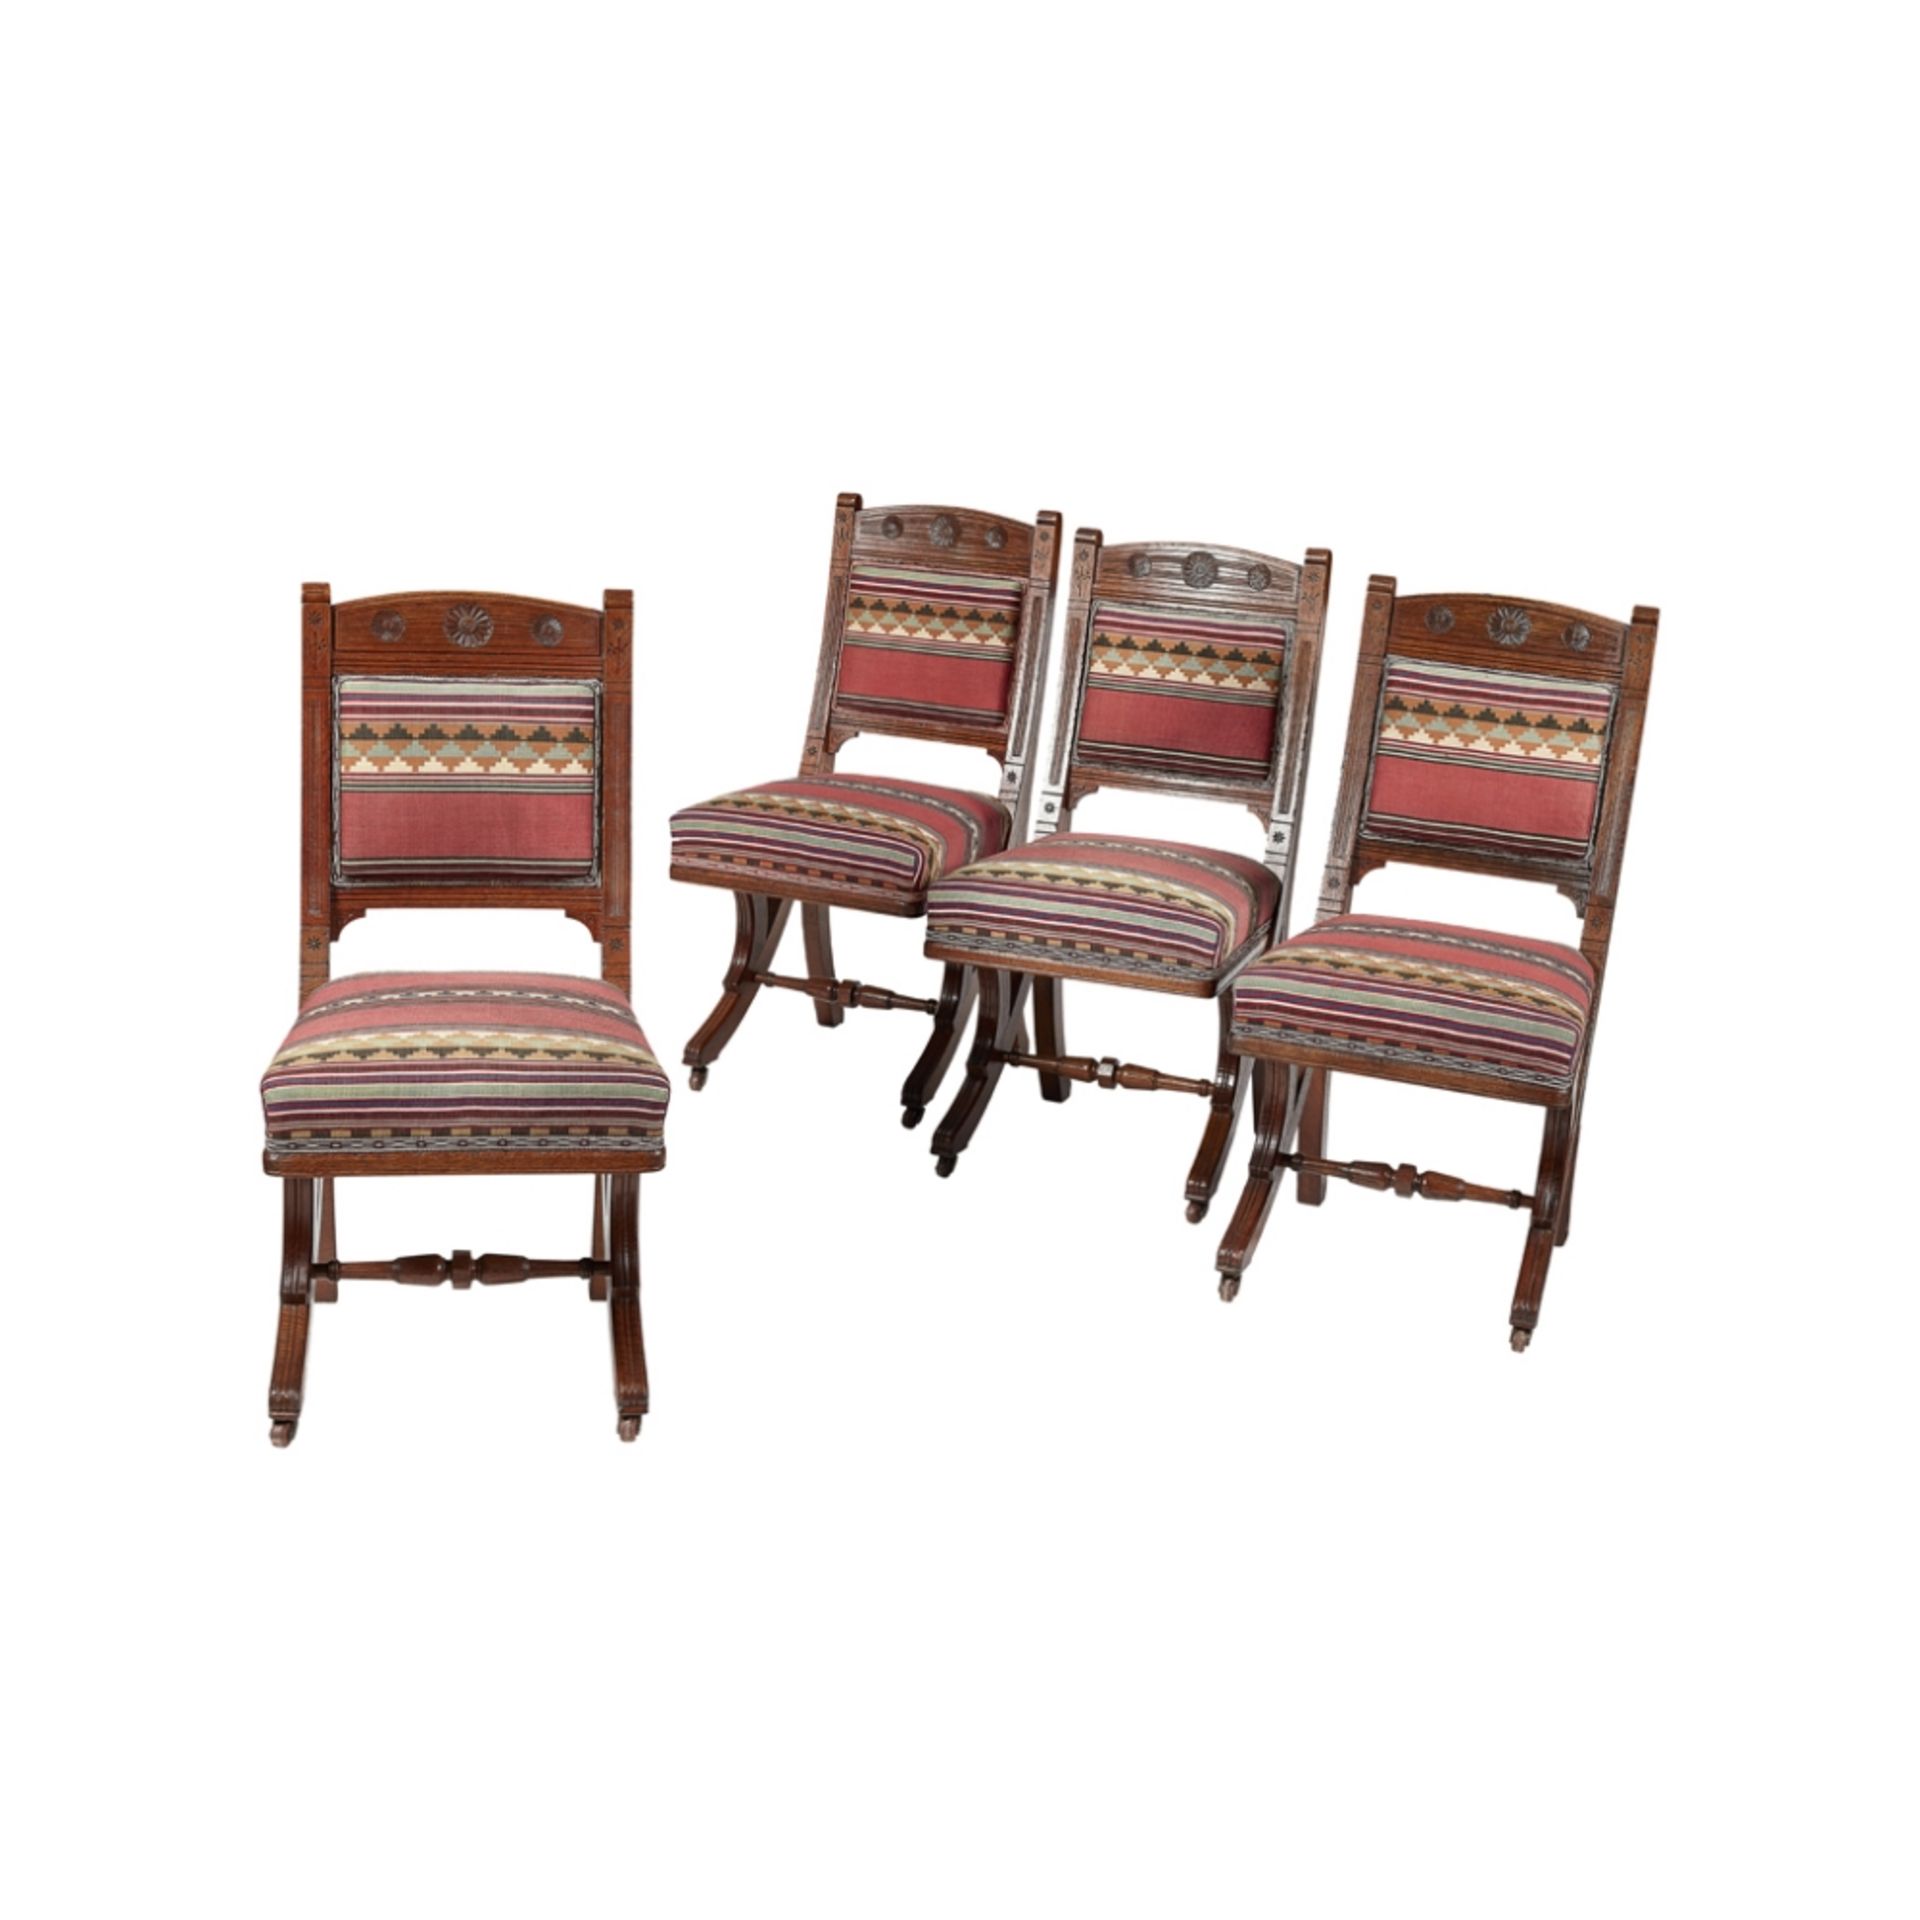 MANNER OF HENRY HOBSON RICHARDSONSET OF FOUR AESTHETIC MOVEMENT UPHOLSTERED OAK DINING CHAIRS, CIRCA